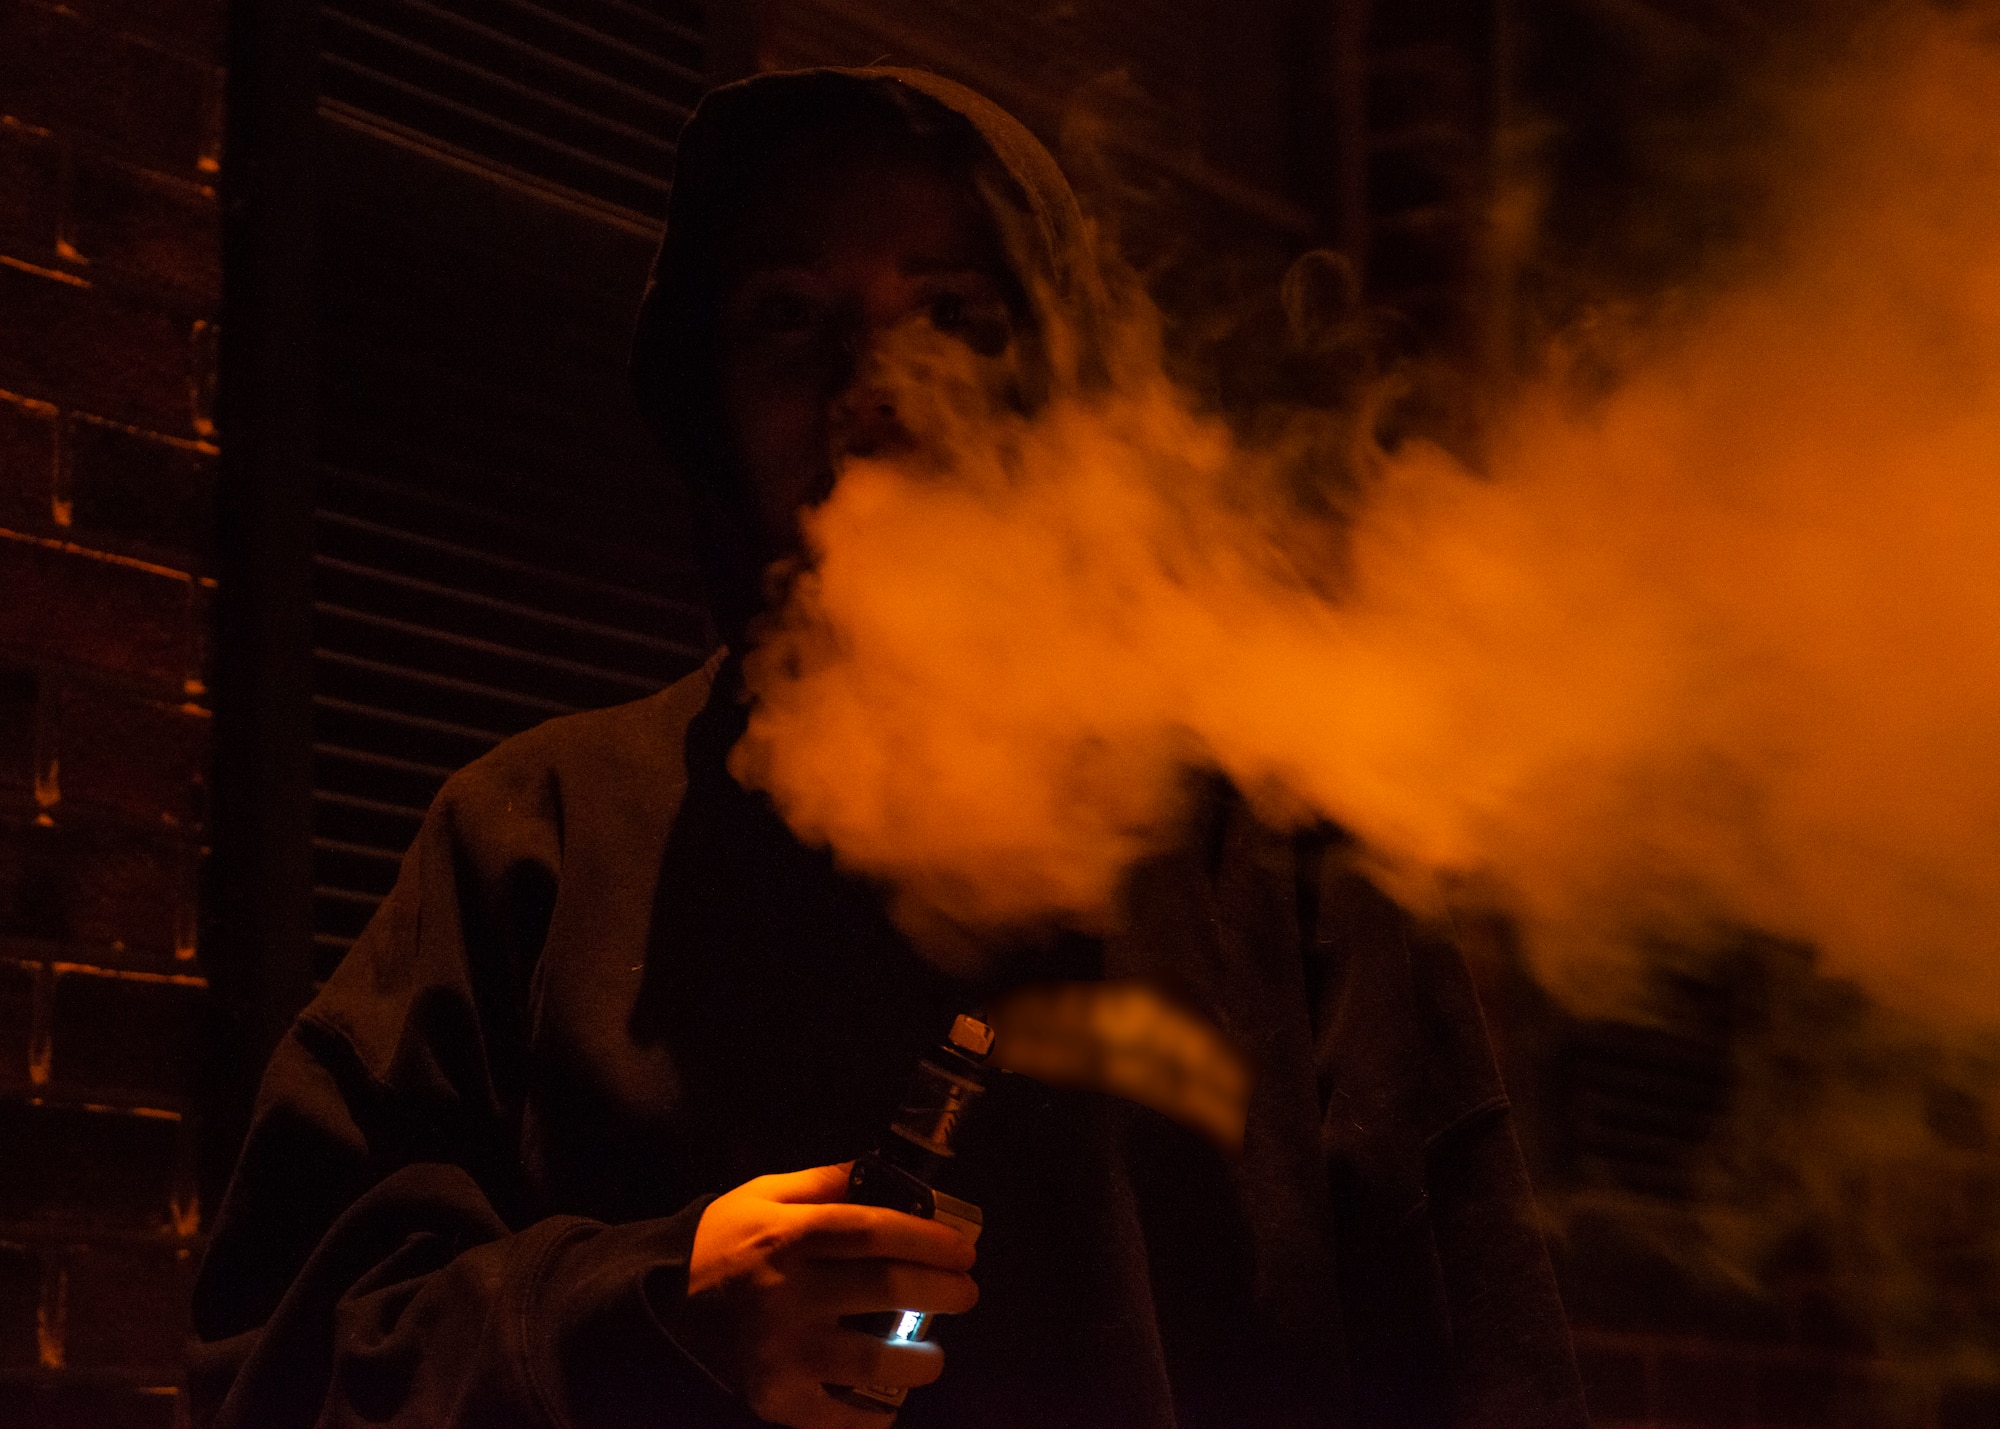 An Airman blows vapor into the air at Warrensburg, MO, Oct. 2, 2019. According to the Centers for Disease Control and Prevention, e-cigarettes produce an aerosol by heating a liquid mixture of nicotine, flavorings or other chemicals which users then inhale. Members should learn the risks they take when choosing to vape and they’re encouraged to use the 509th Medical Group’s resources for quitting smoking or vaping. (U.S. Air Force photo by Staff Sgt. Sadie Colbert)